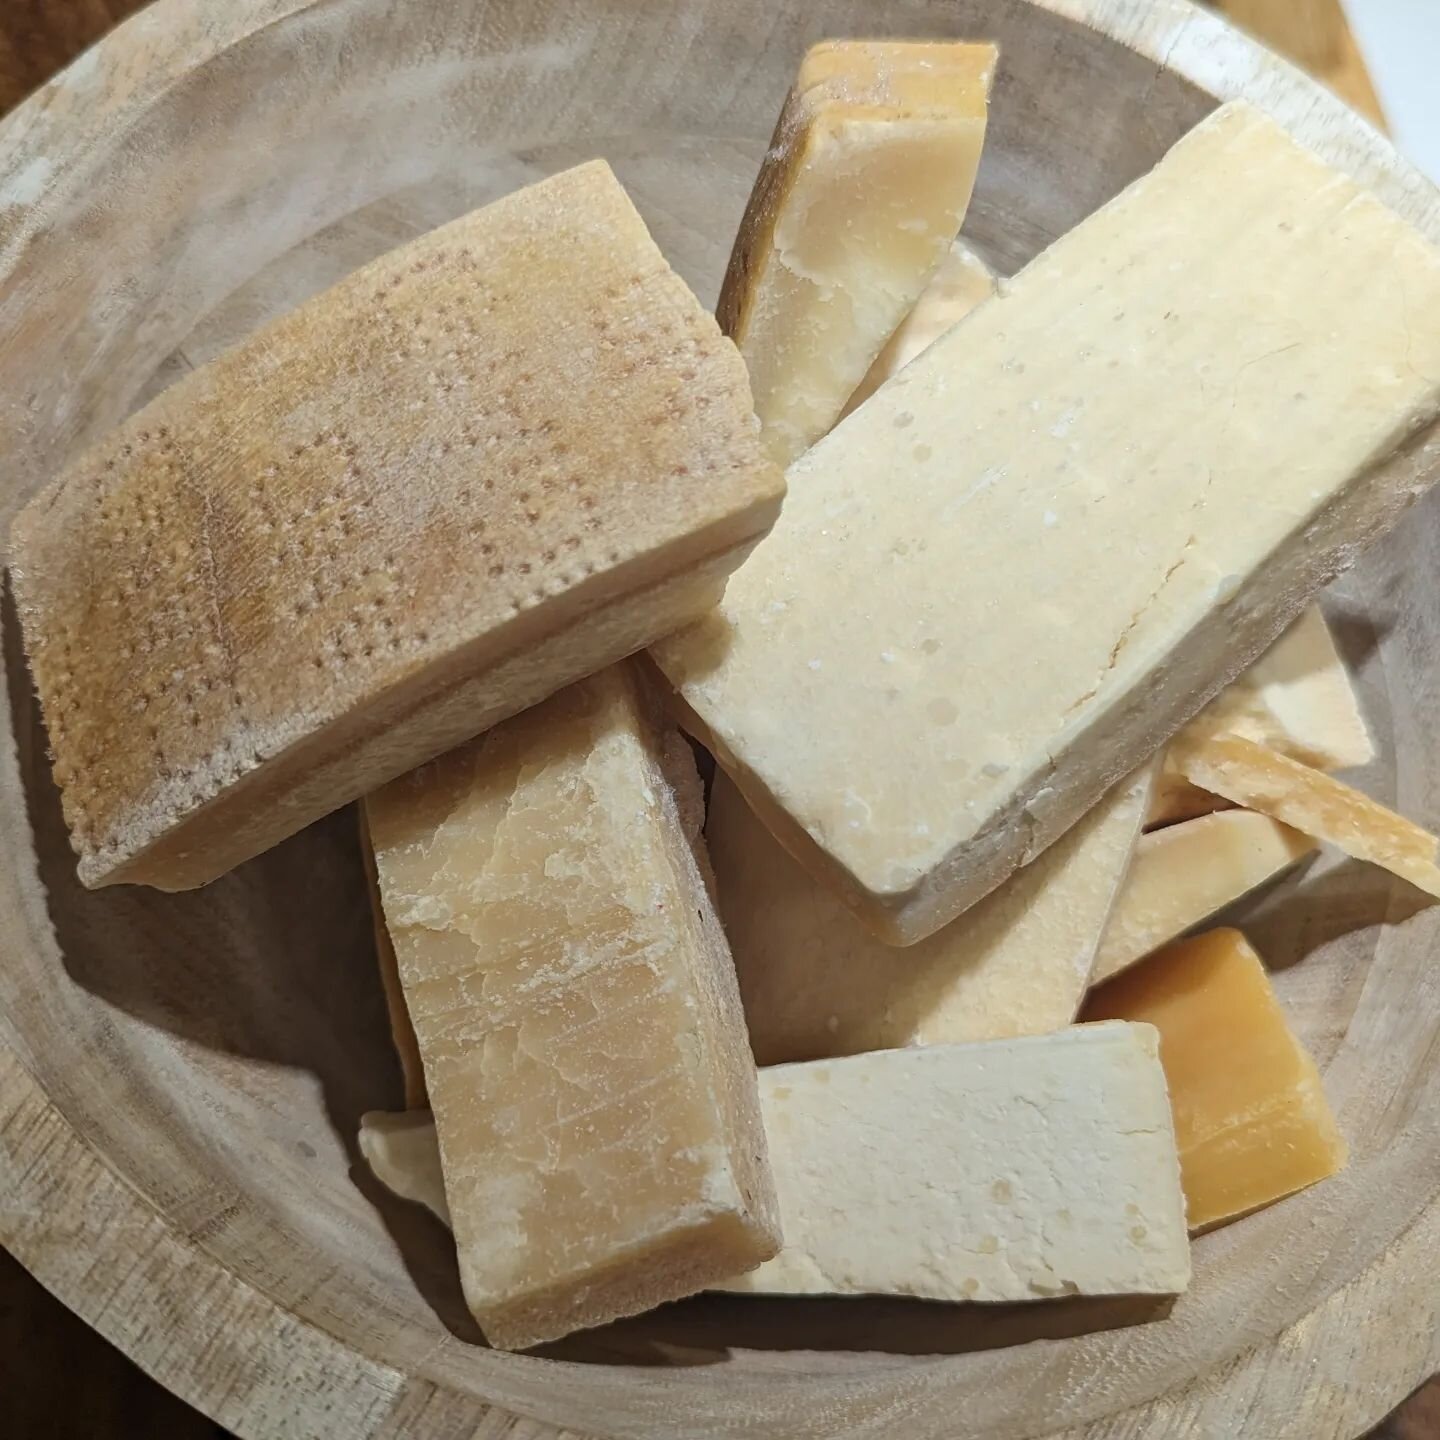 PRO TIP: USE PARM RINDS! Contrary to popular belief, parmesan rinds are pure cheese, not made from wax. Use them as you would other aromatics or even bones. Freeze them! They add tremendous flavor and depth to soups and sauces. Someday soon I will po